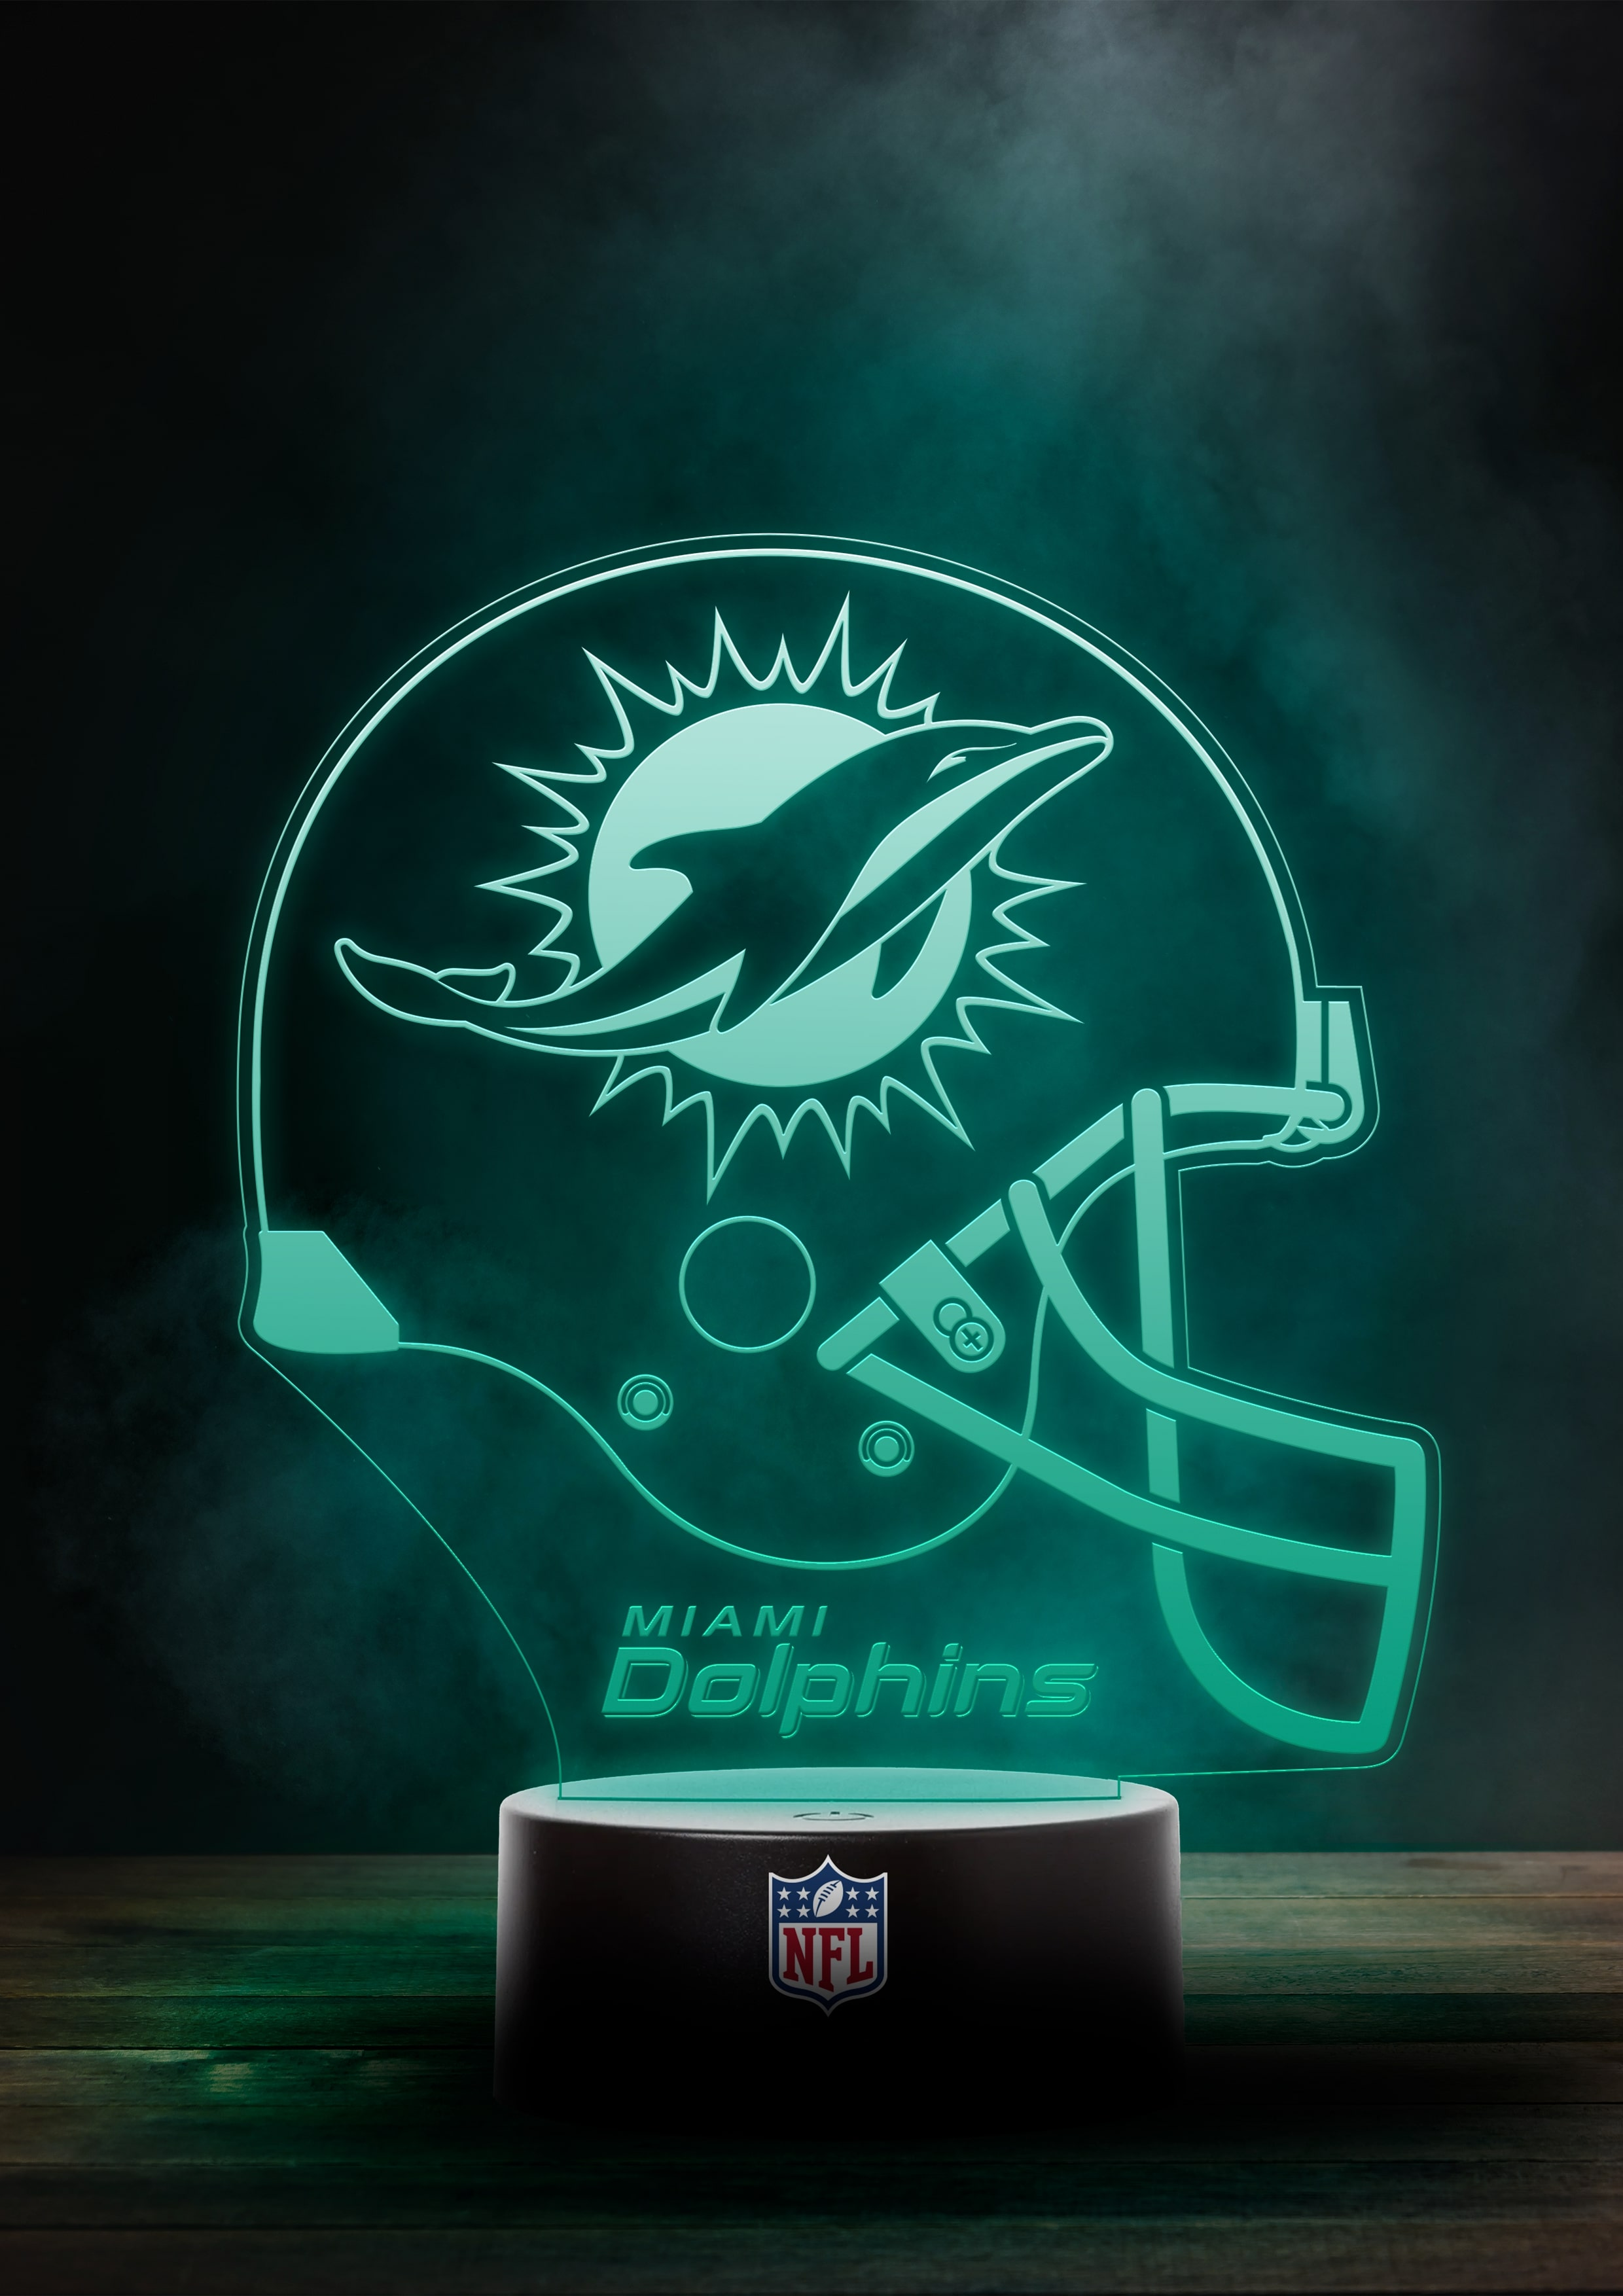 GREAT BRANDING Miami Dolphins NFL \